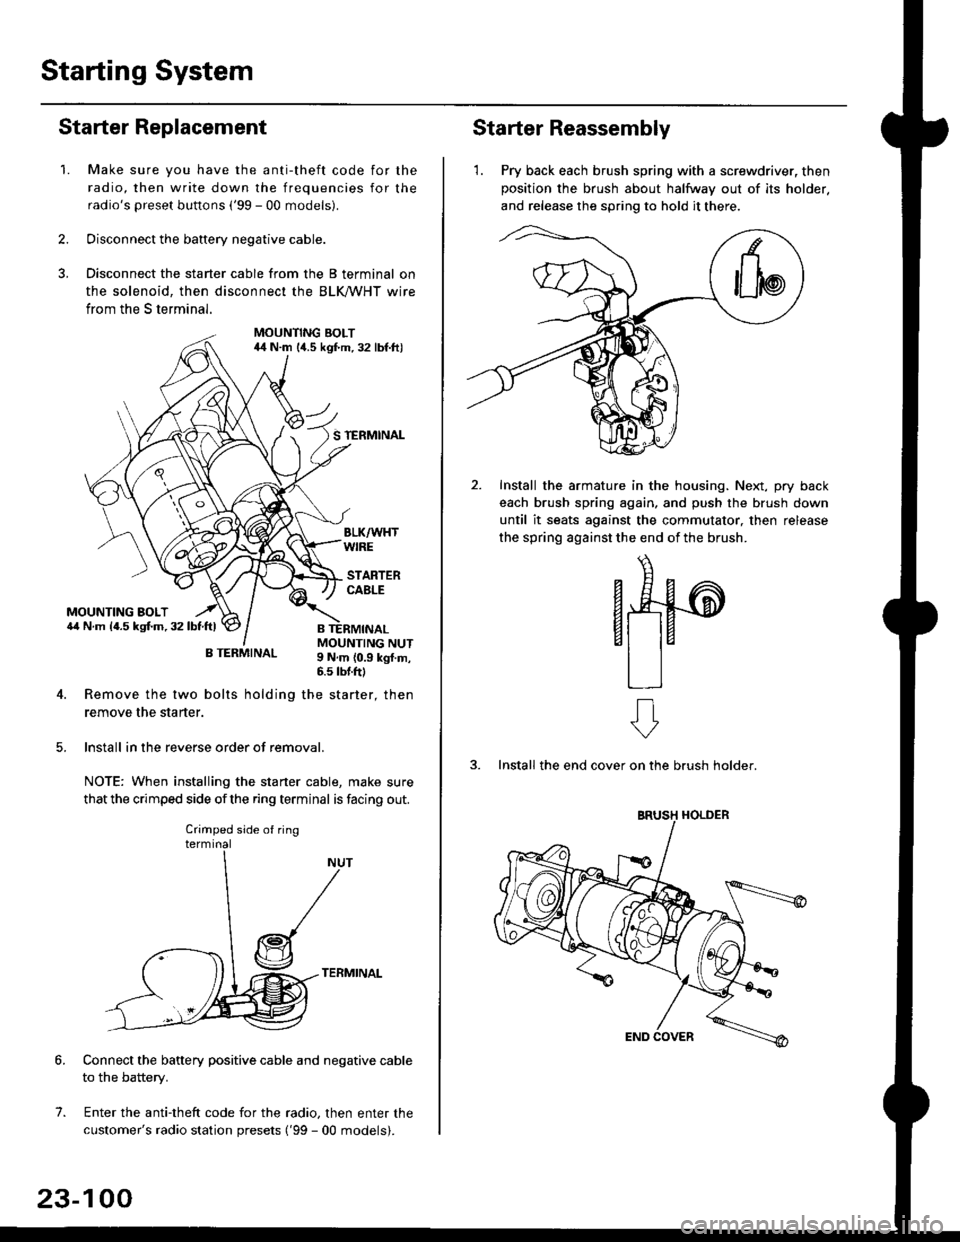 HONDA CIVIC 2000 6.G Workshop Manual Starting System
Starter Replacement
1.Make sure you have the anti-theft code for the
radio, then write down the frequencies for the
radios preset buttons (99 - 00 models).
Disconnect the battery neg